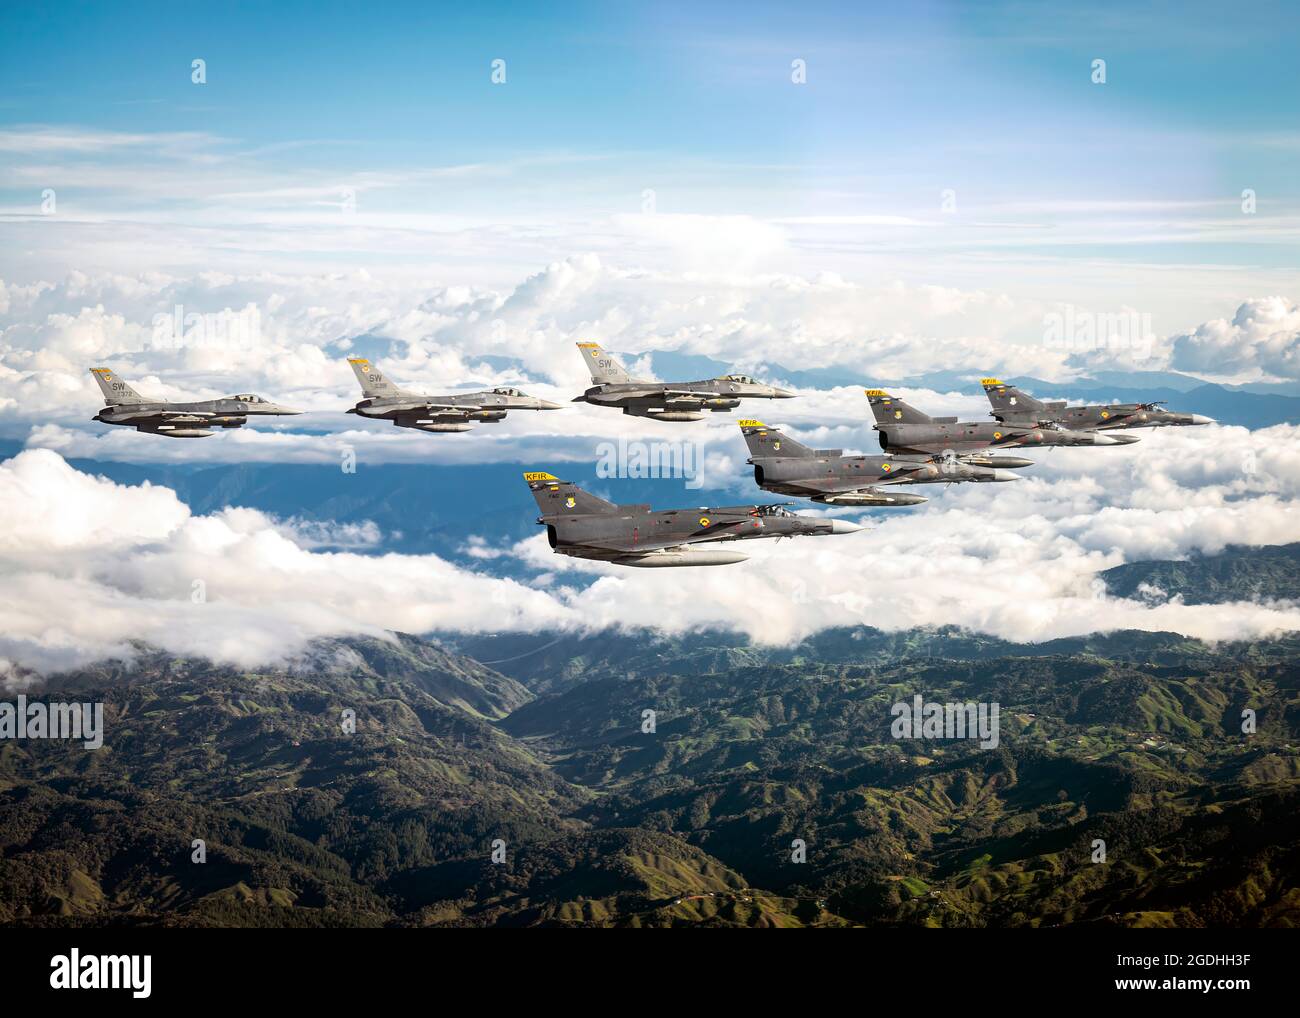 U.S. Air Force F-16 Fighting Falcons assigned to the 79th Expeditionary Fighter Squadron and Colombian Air Force Kfirs fly in formation over Colombia during Exercise Relampago VI, July 27, 2021.  Relampago VI is a combined Colombian and U.S. exercise taking place in the U.S. Southern Command (SOUTHCOM) theater that focuses on techniques, tactics and procedures to strengthen the longstanding partnership between our armed forces. (U.S. Air Force photo by Senior Airman Duncan C. Bevan) Stock Photo